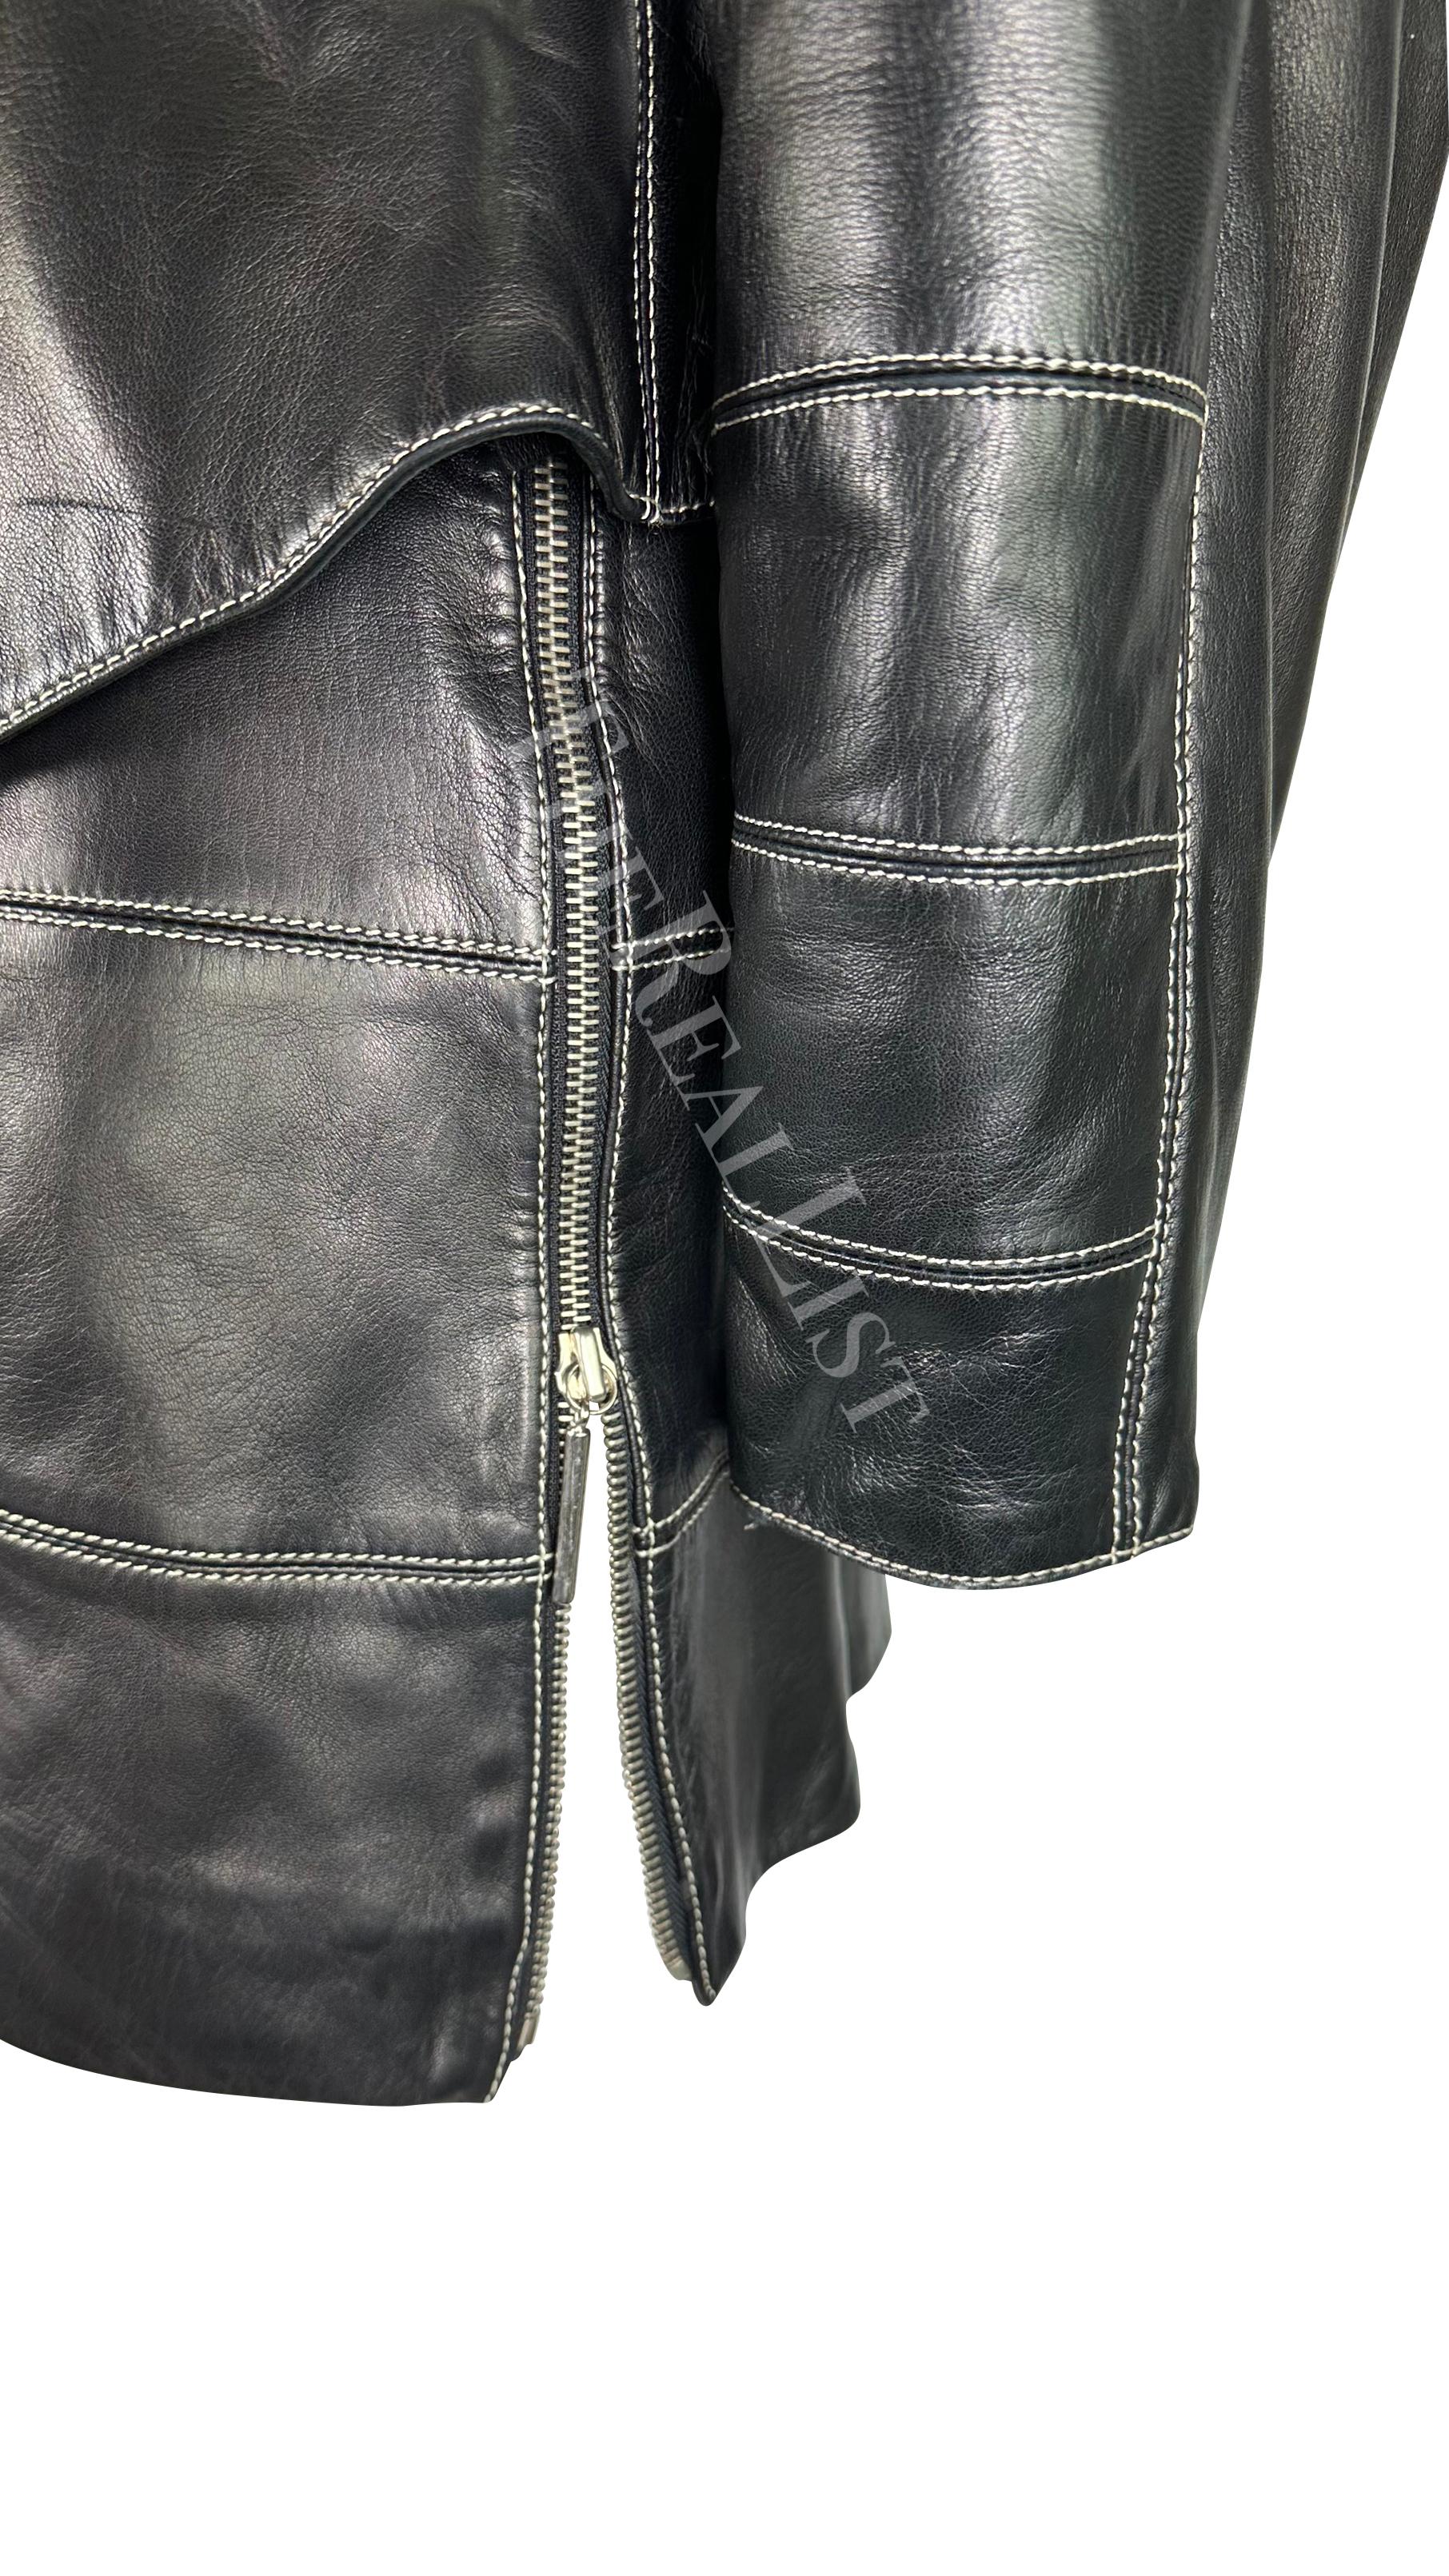 F/W 1991 Claude Montana Runway Leather Moto Jacket Skirt Set In Excellent Condition For Sale In West Hollywood, CA